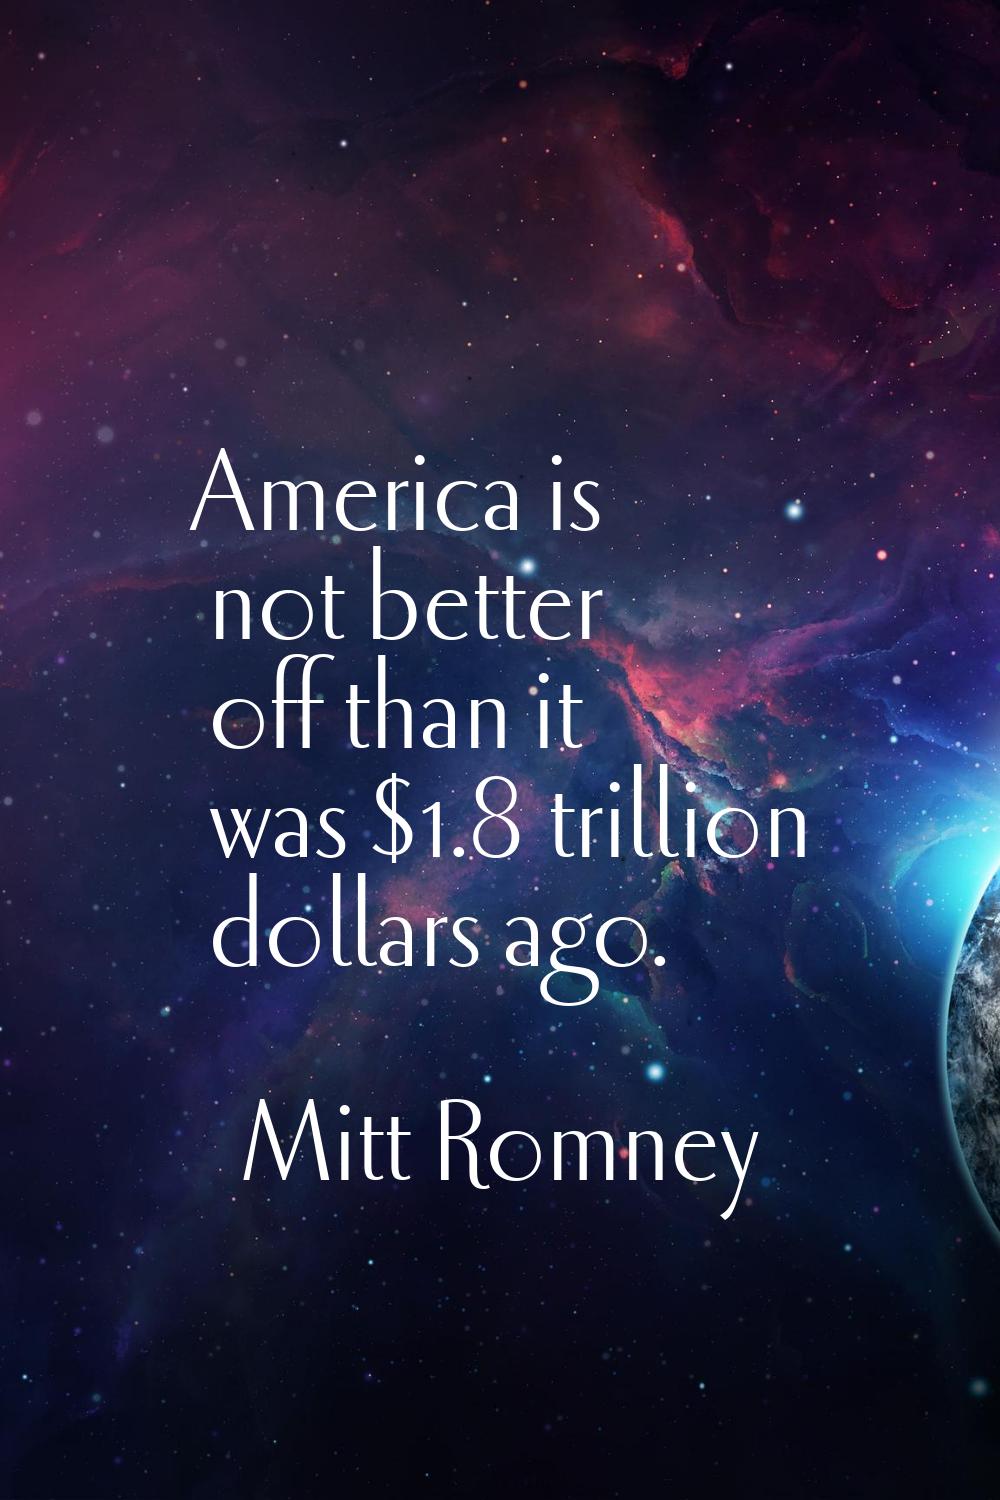 America is not better off than it was $1.8 trillion dollars ago.